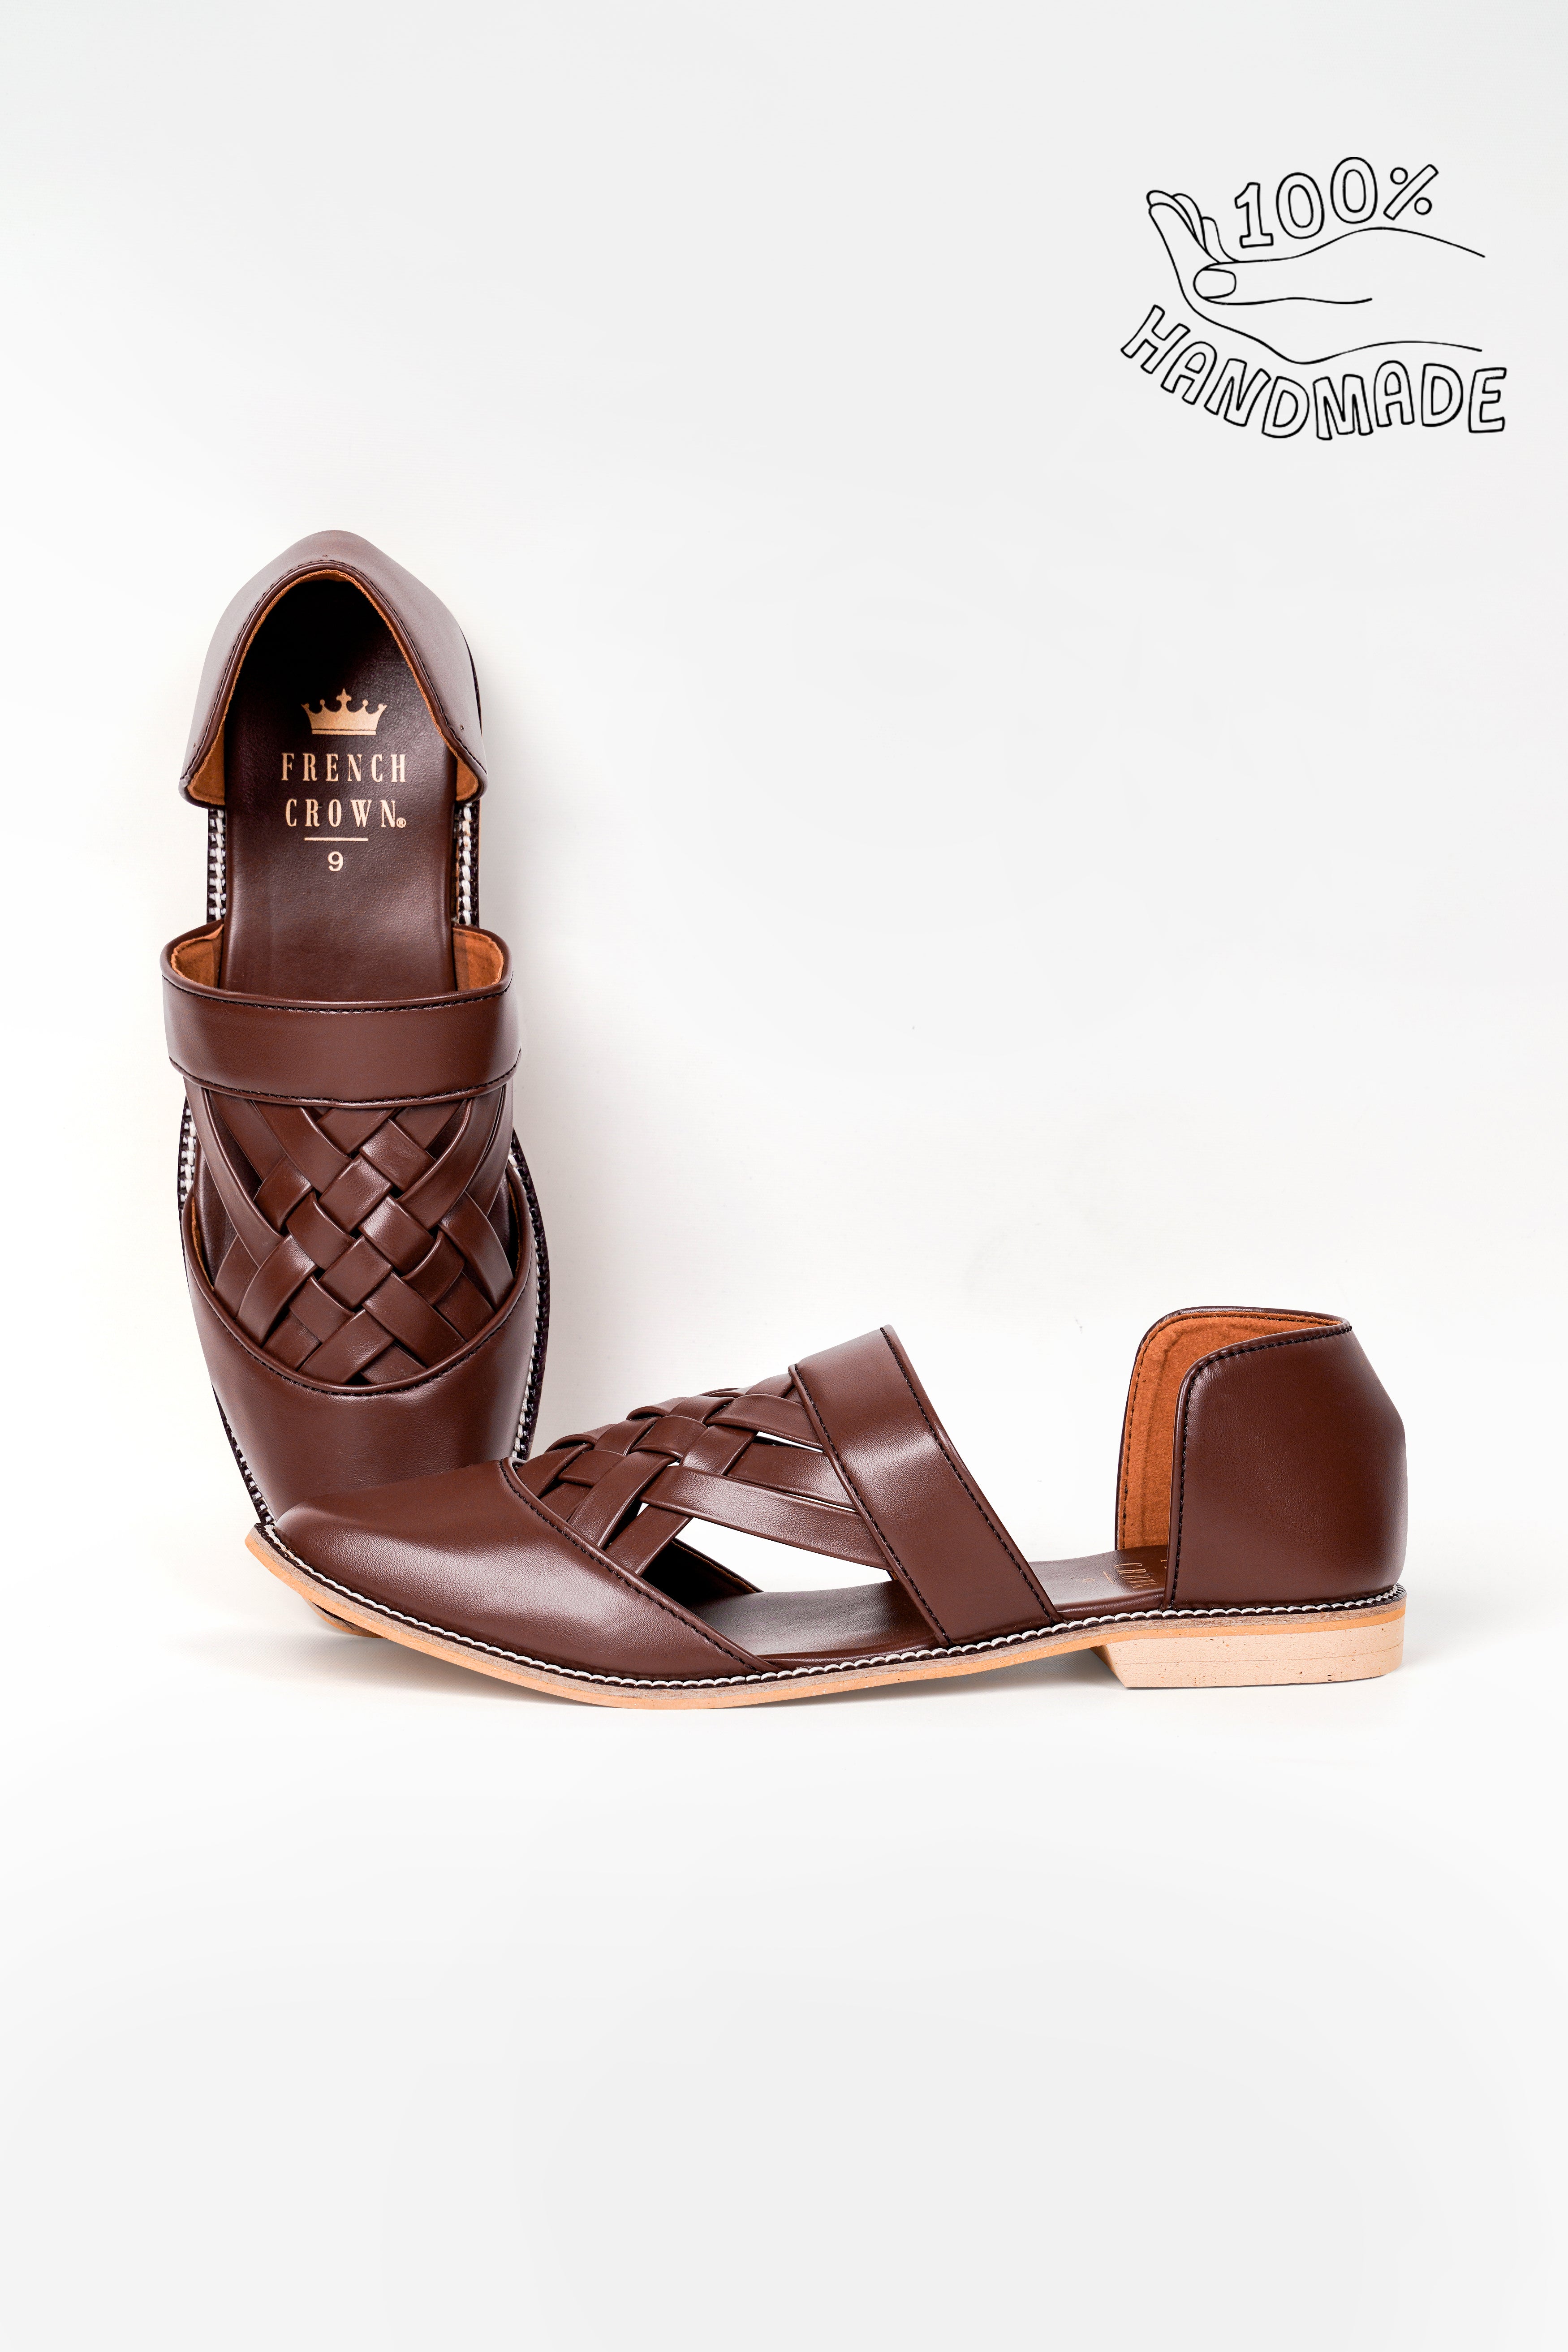 Brown Classic Criss Cross Strapped Vegan Leather Hand Stitched Pathanis Sandal FT132-6, FT132-7, FT132-8, FT132-9, FT132-10, FT132-11